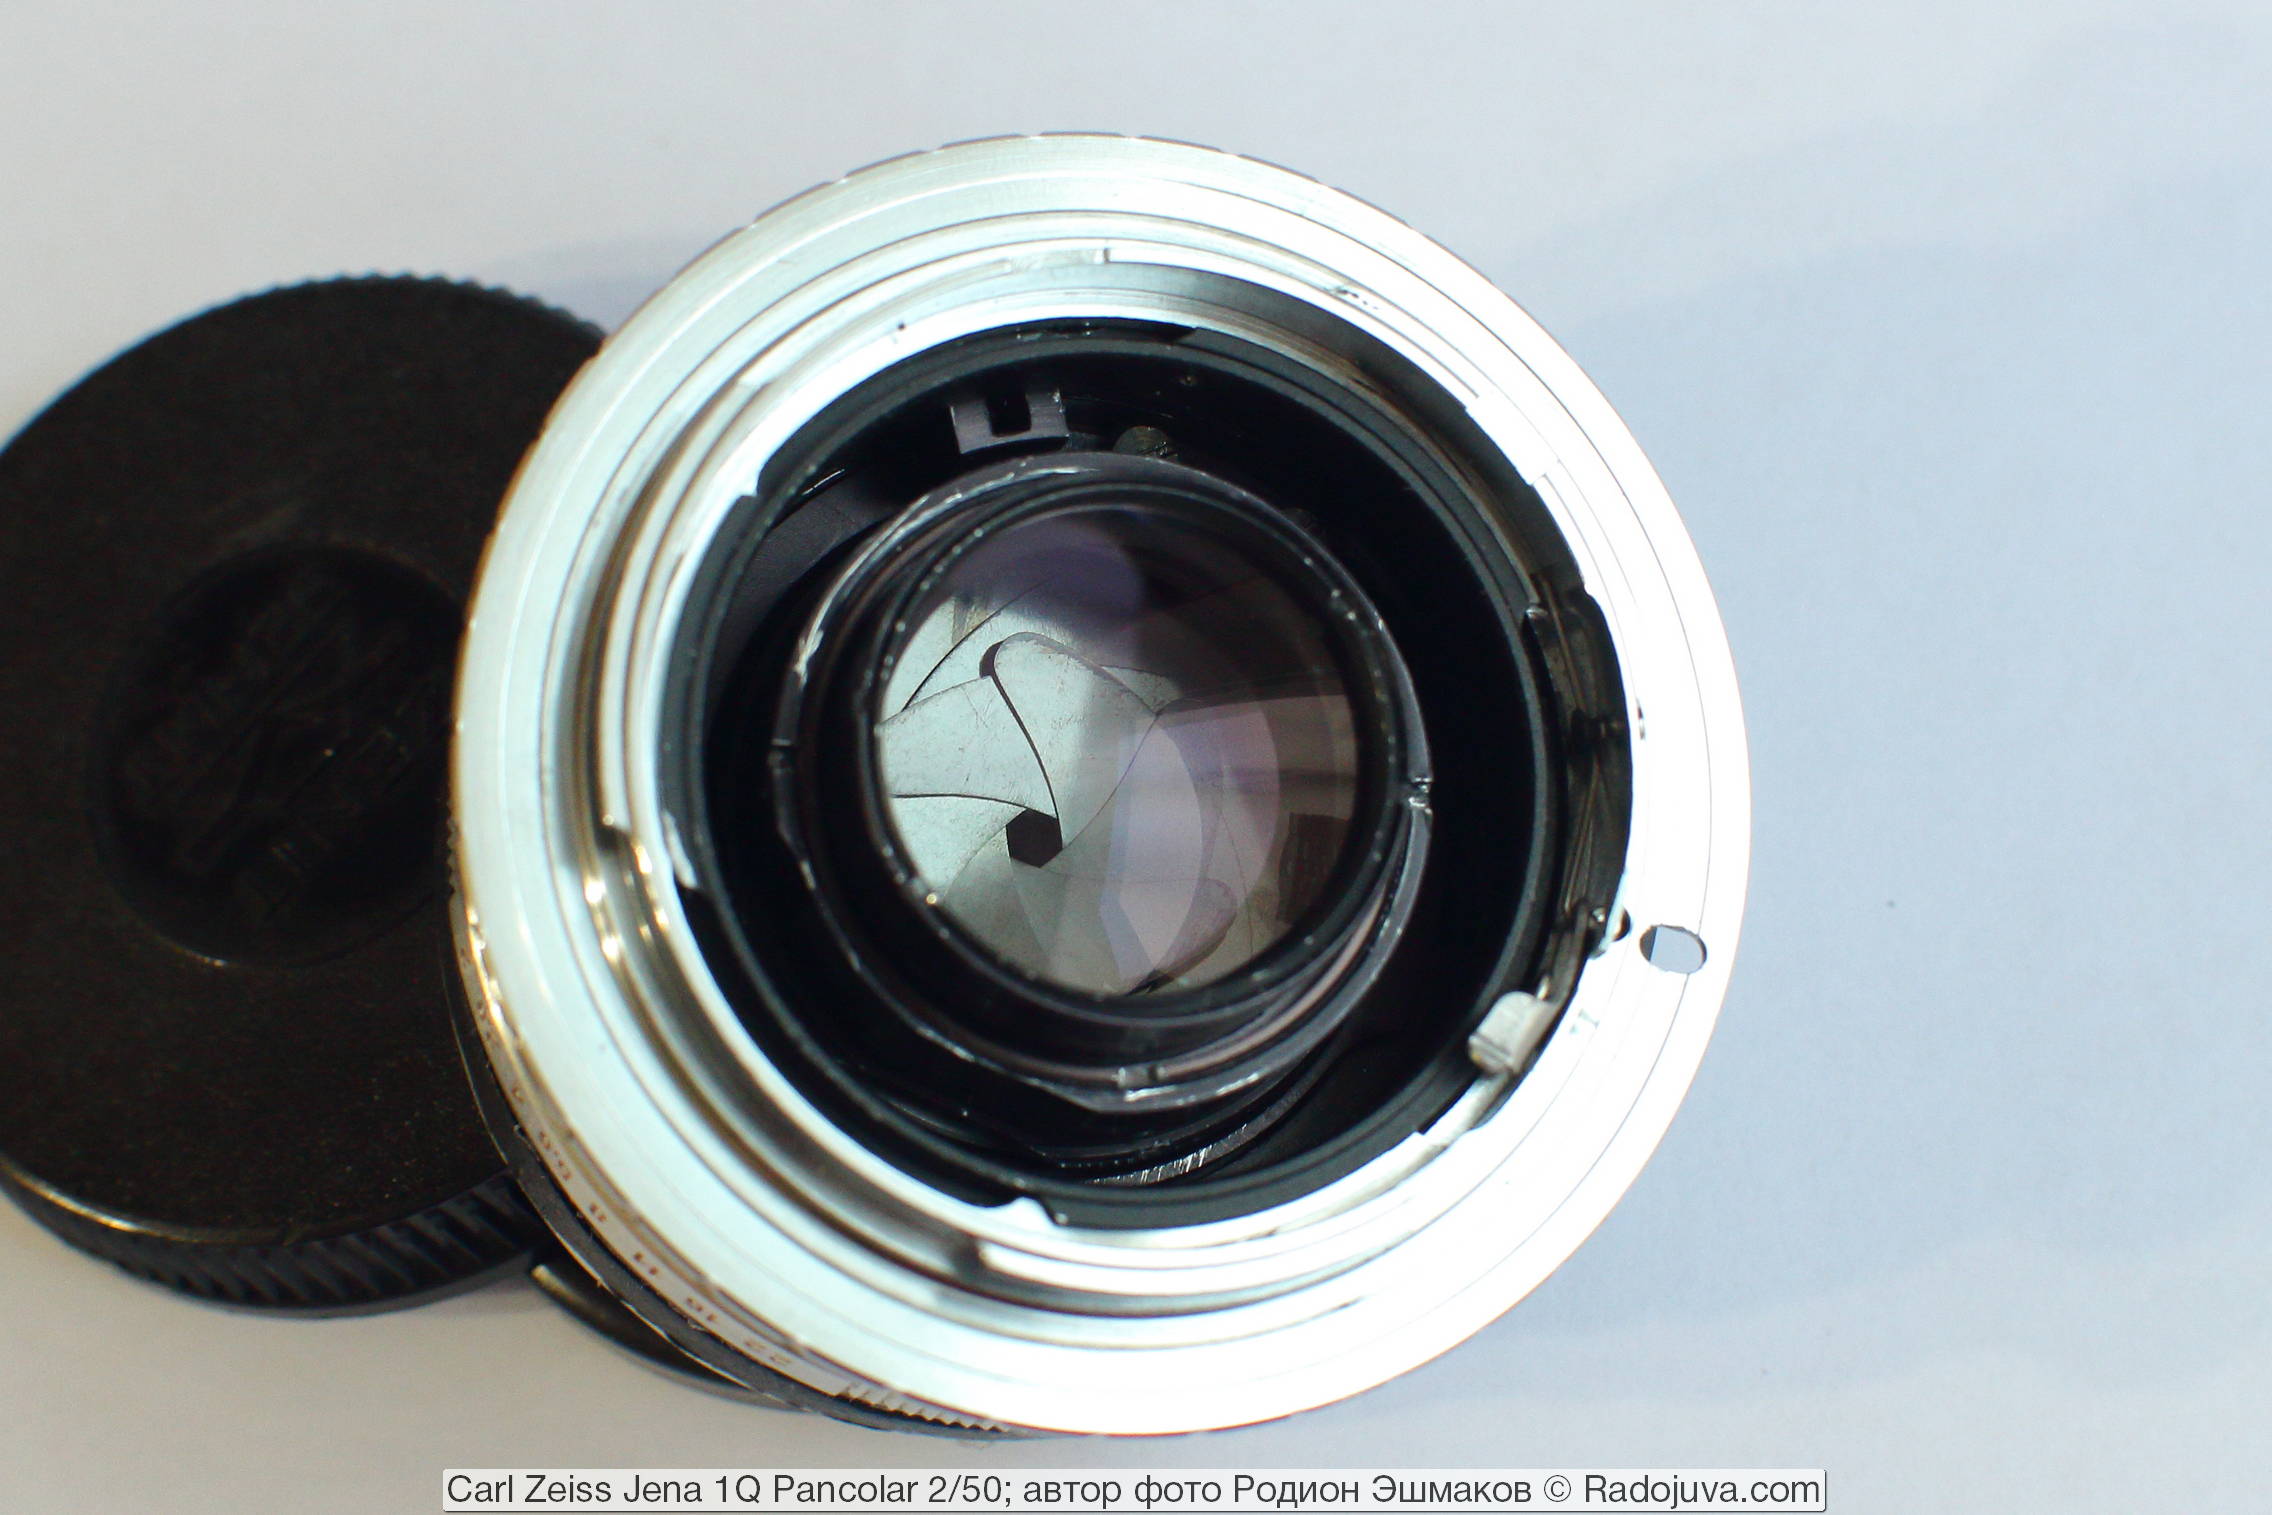 The rear lens block in the middle of the void in the converted lens.